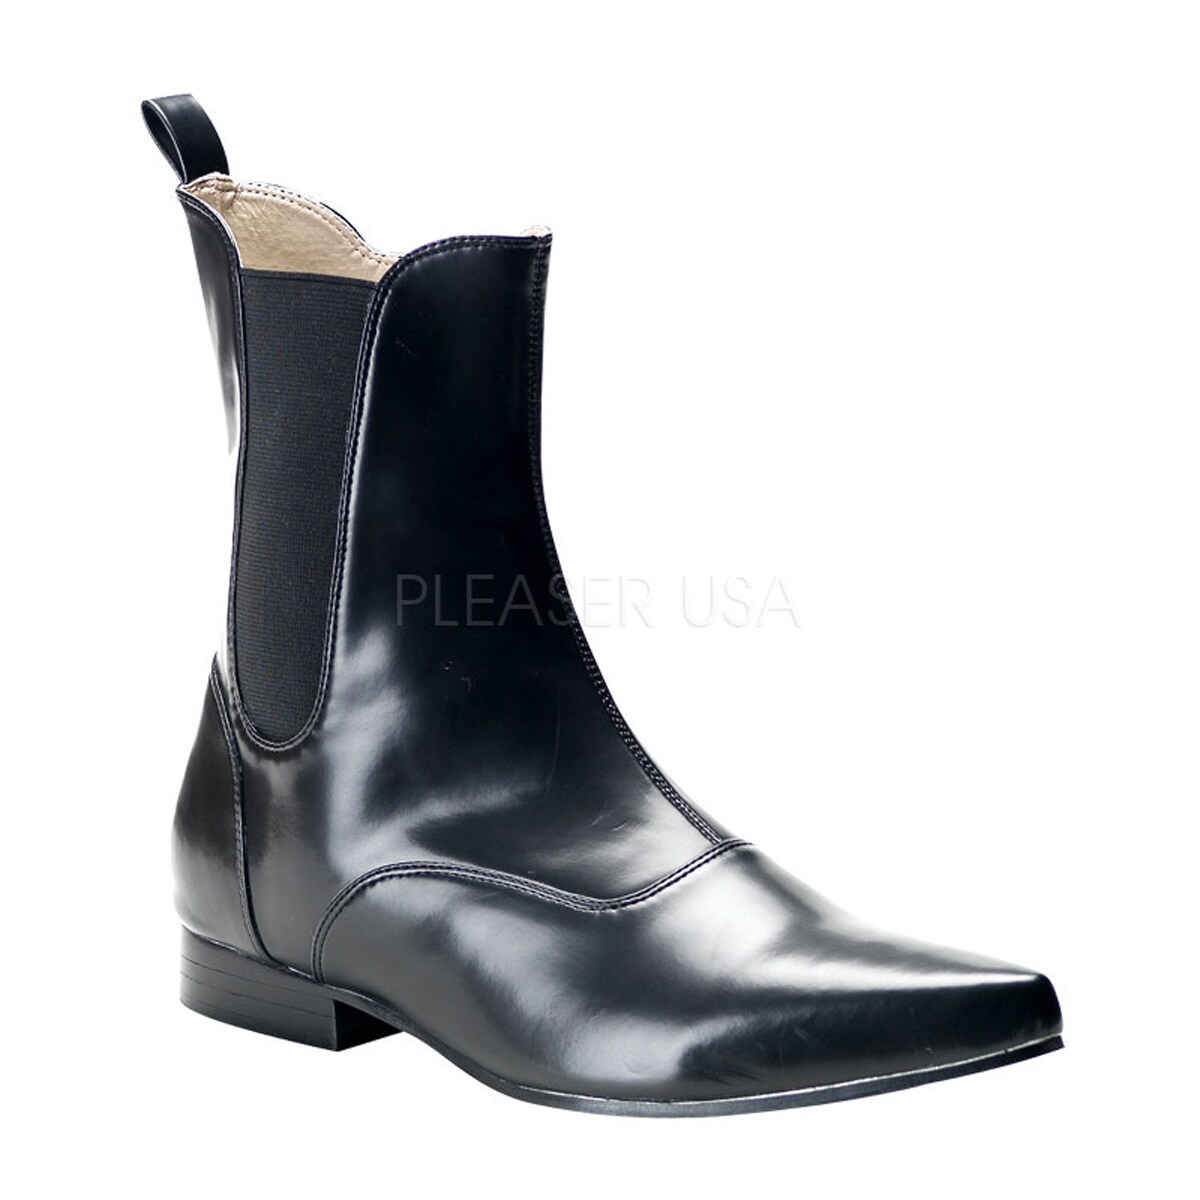 mens black leather pointed winklepicker shoes